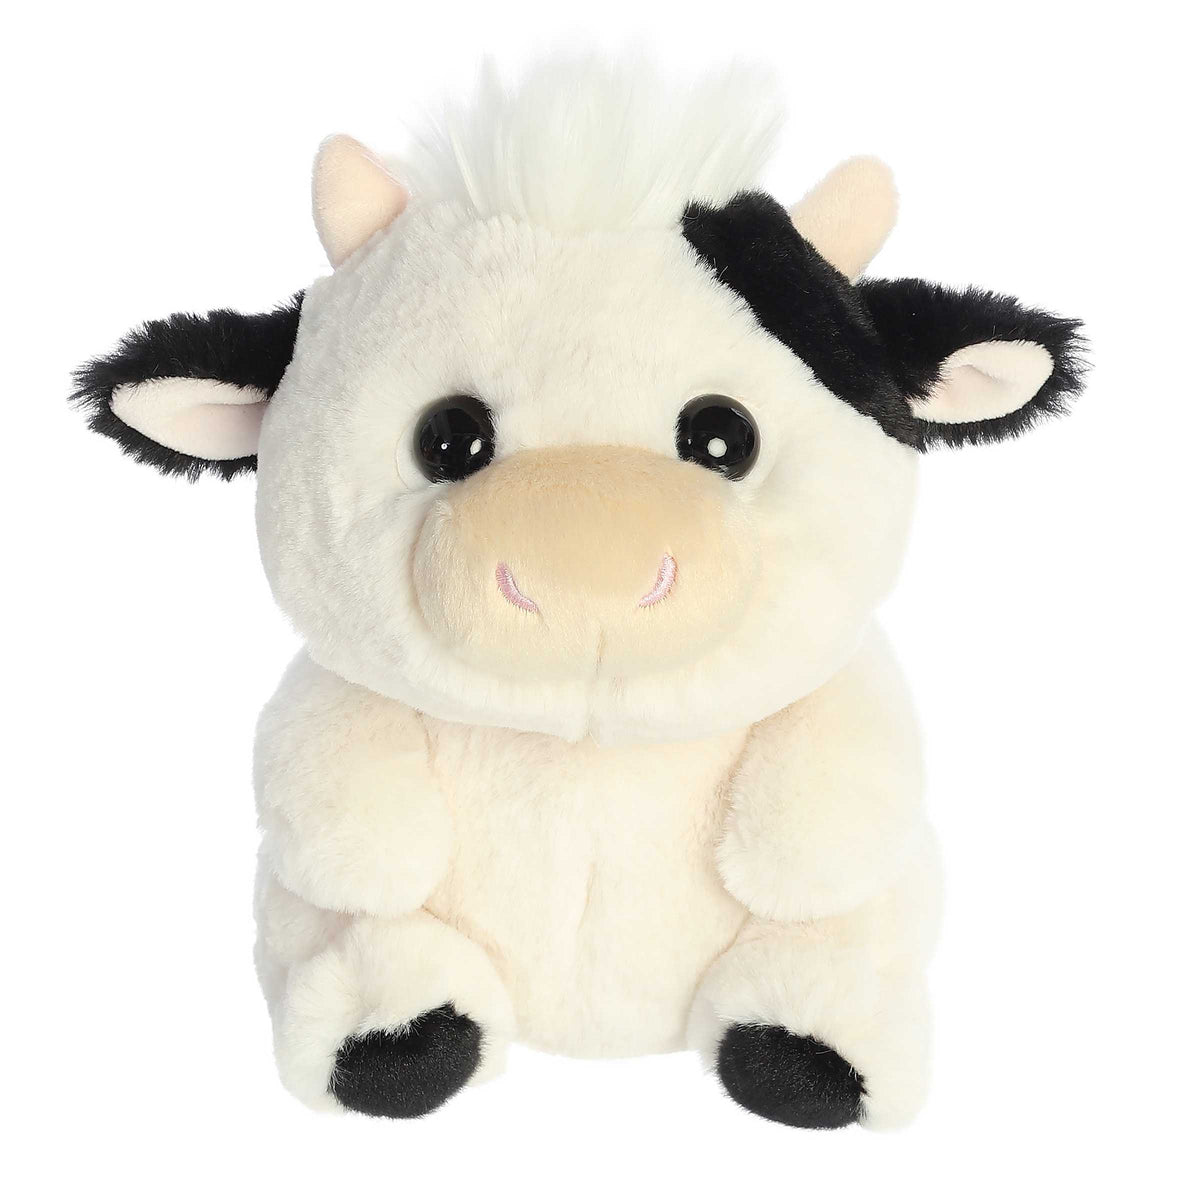 Cute cuddly cow calf Stuffed animals with black and white fur body, fluffy white mane, and black fur details on ears and toes